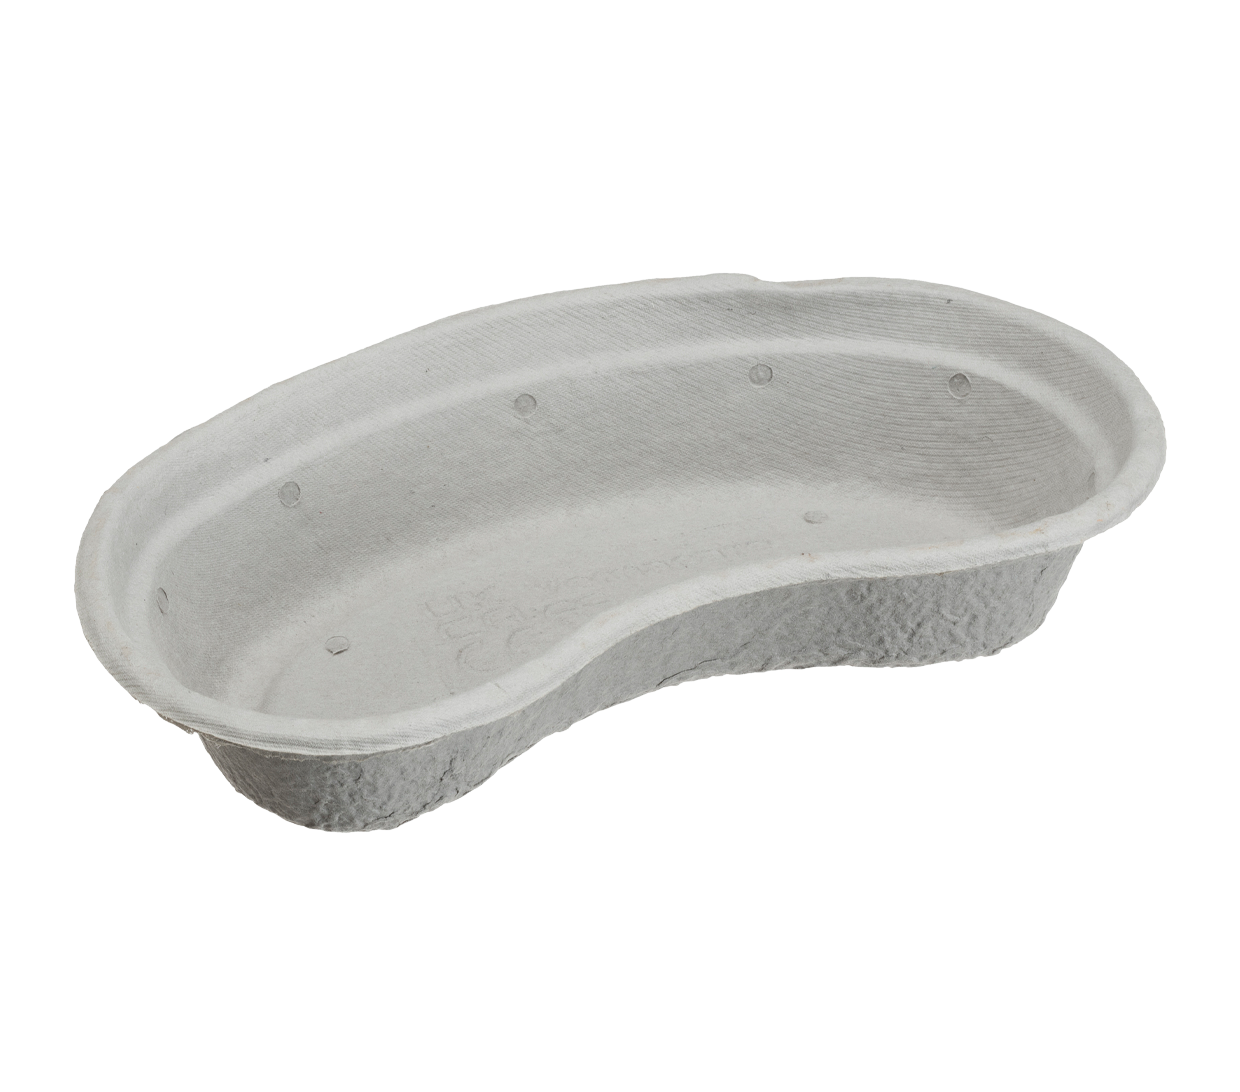 These single-use medical grade fiber kidney bowls are constructed with a biodegradable pulp fiber made from 100% recycled newsprint and ideal for handling 700ml of fluid.